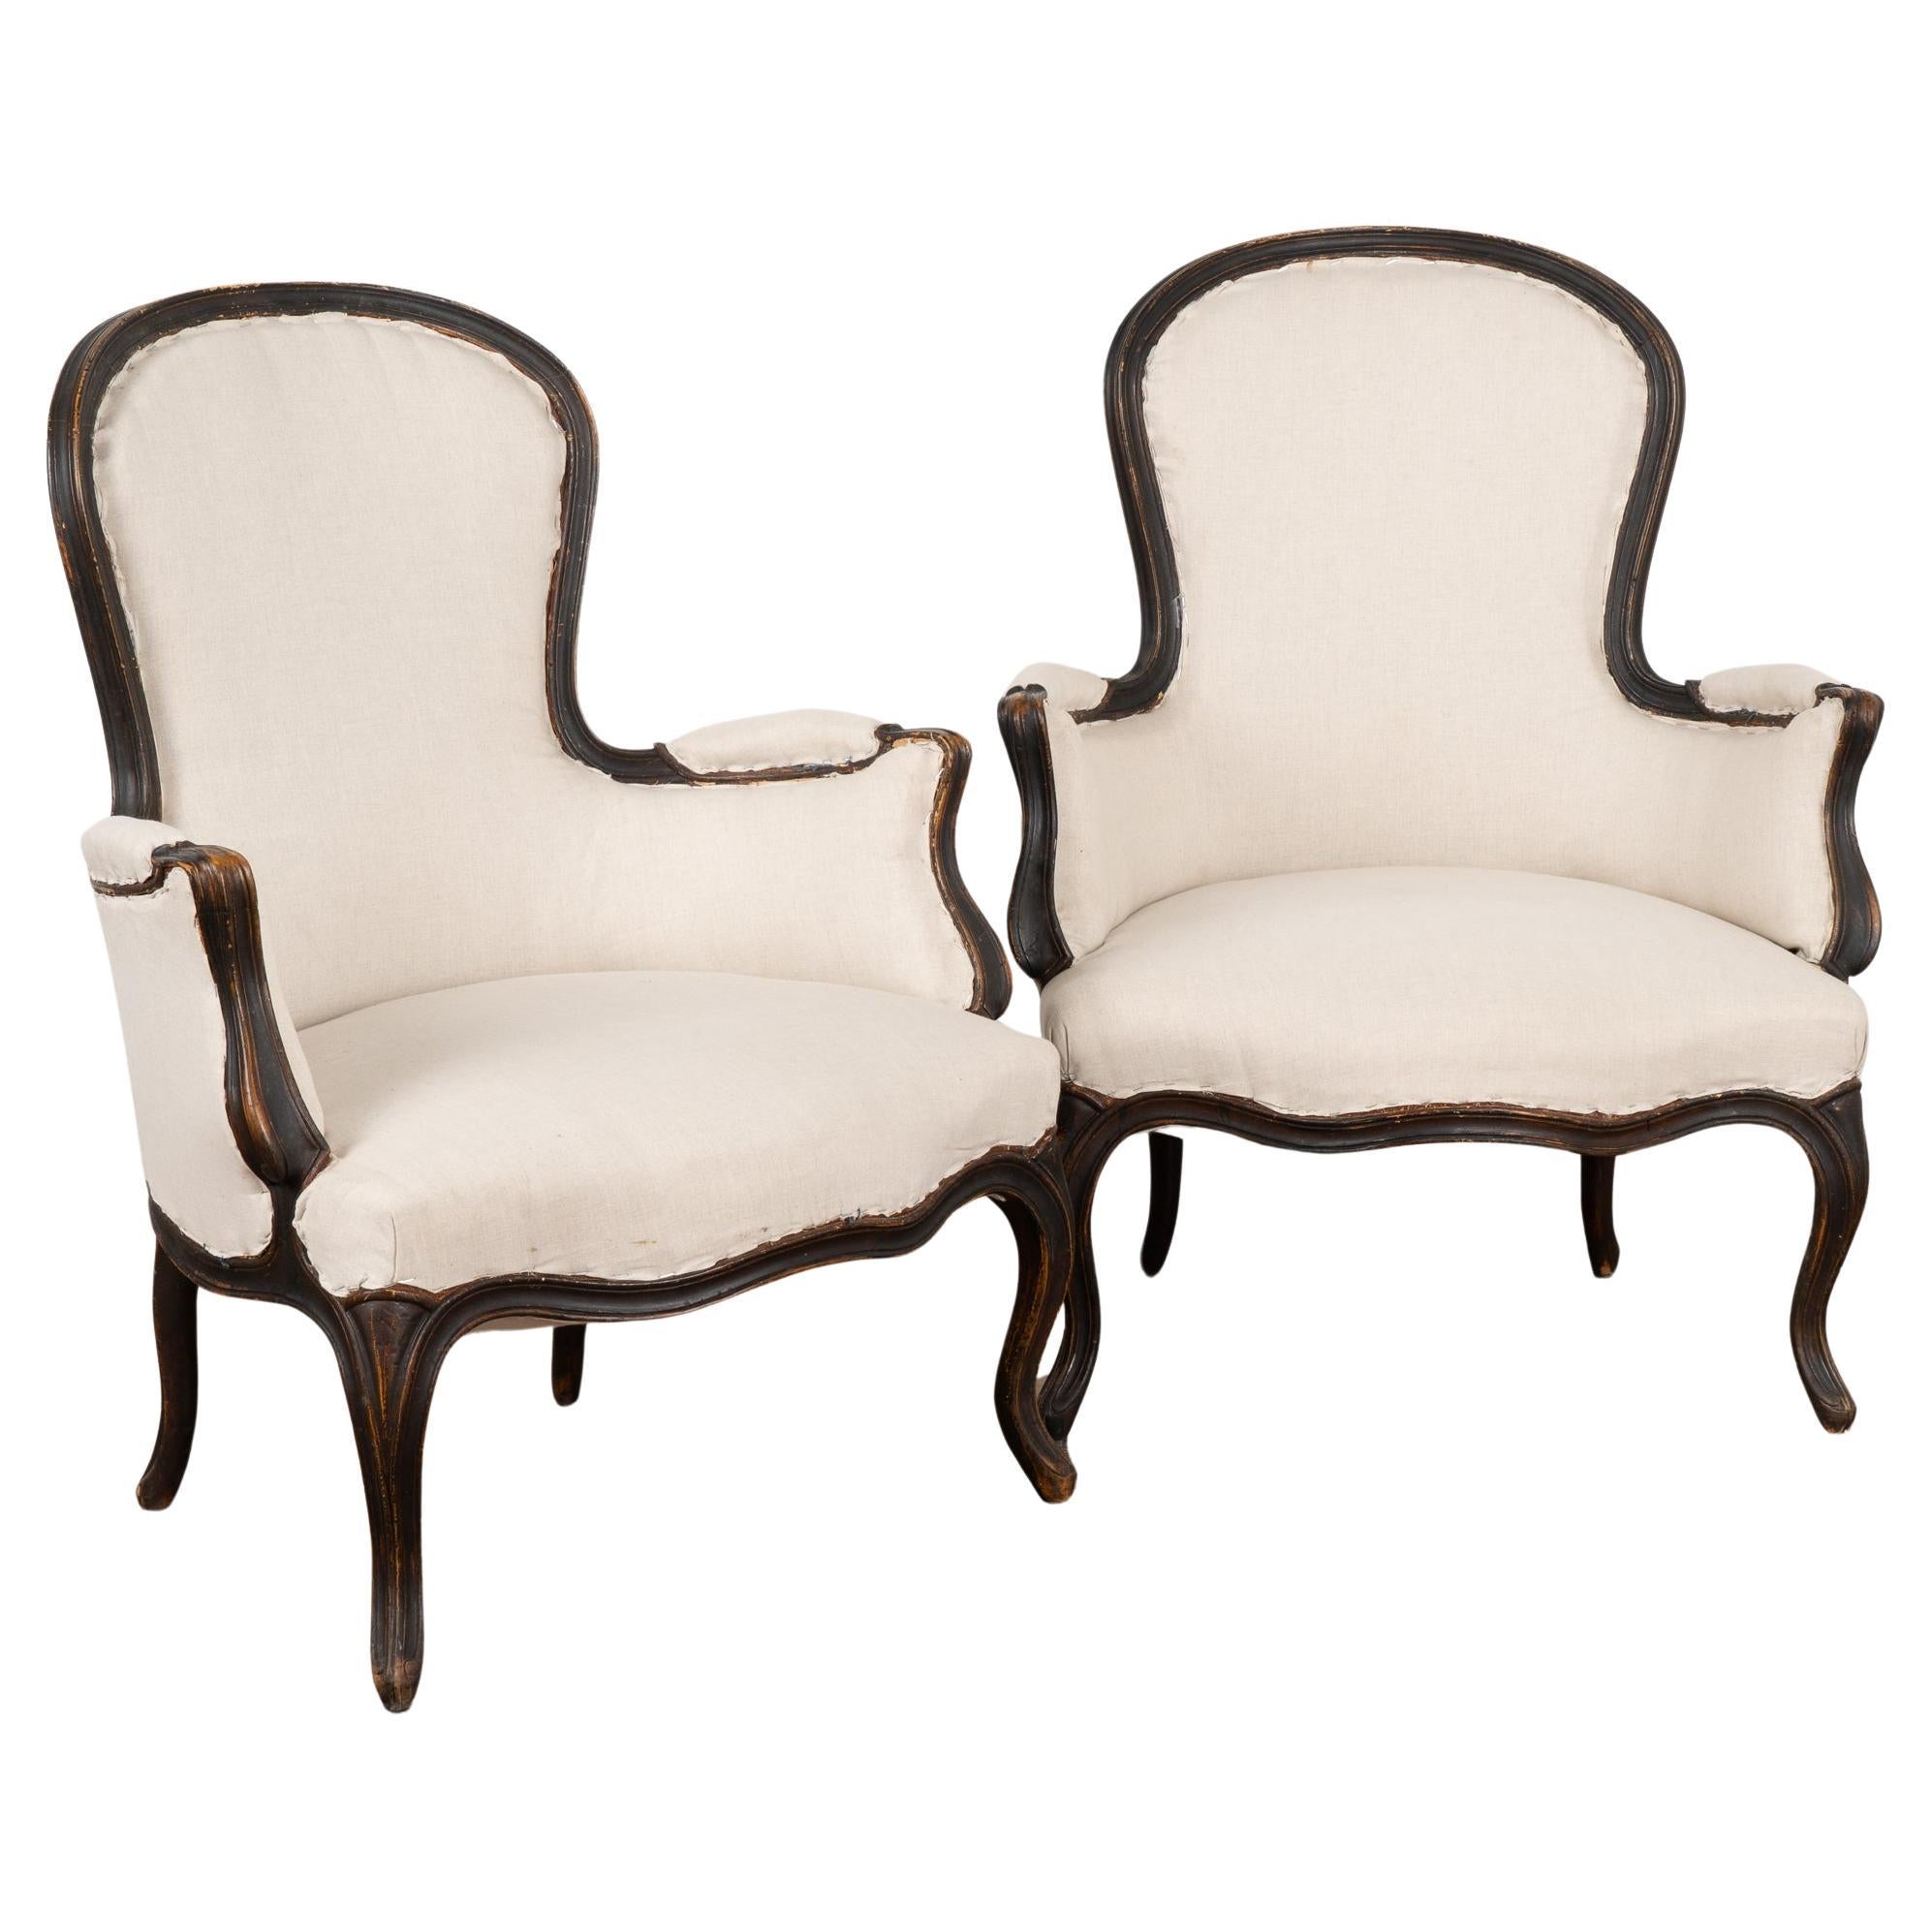 Pair, Black Painted Swedish Arm Chairs, circa 1890 For Sale